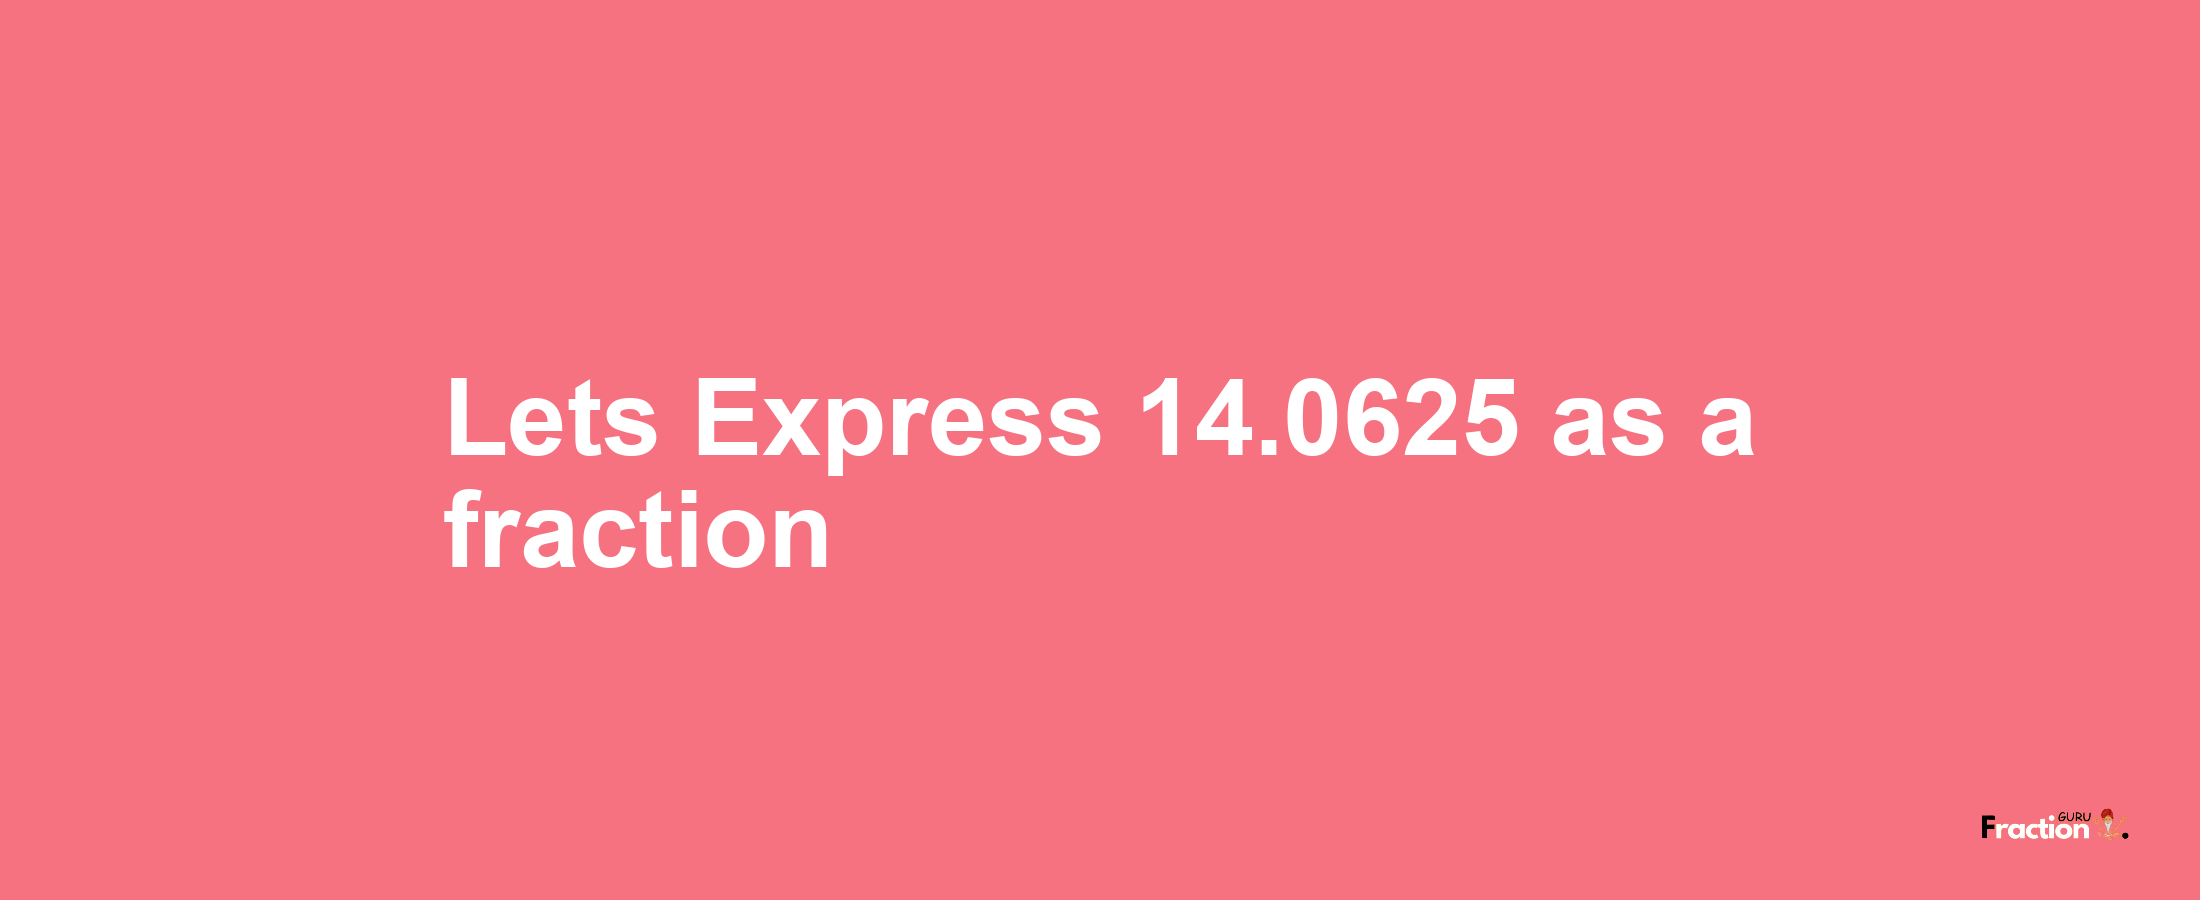 Lets Express 14.0625 as afraction